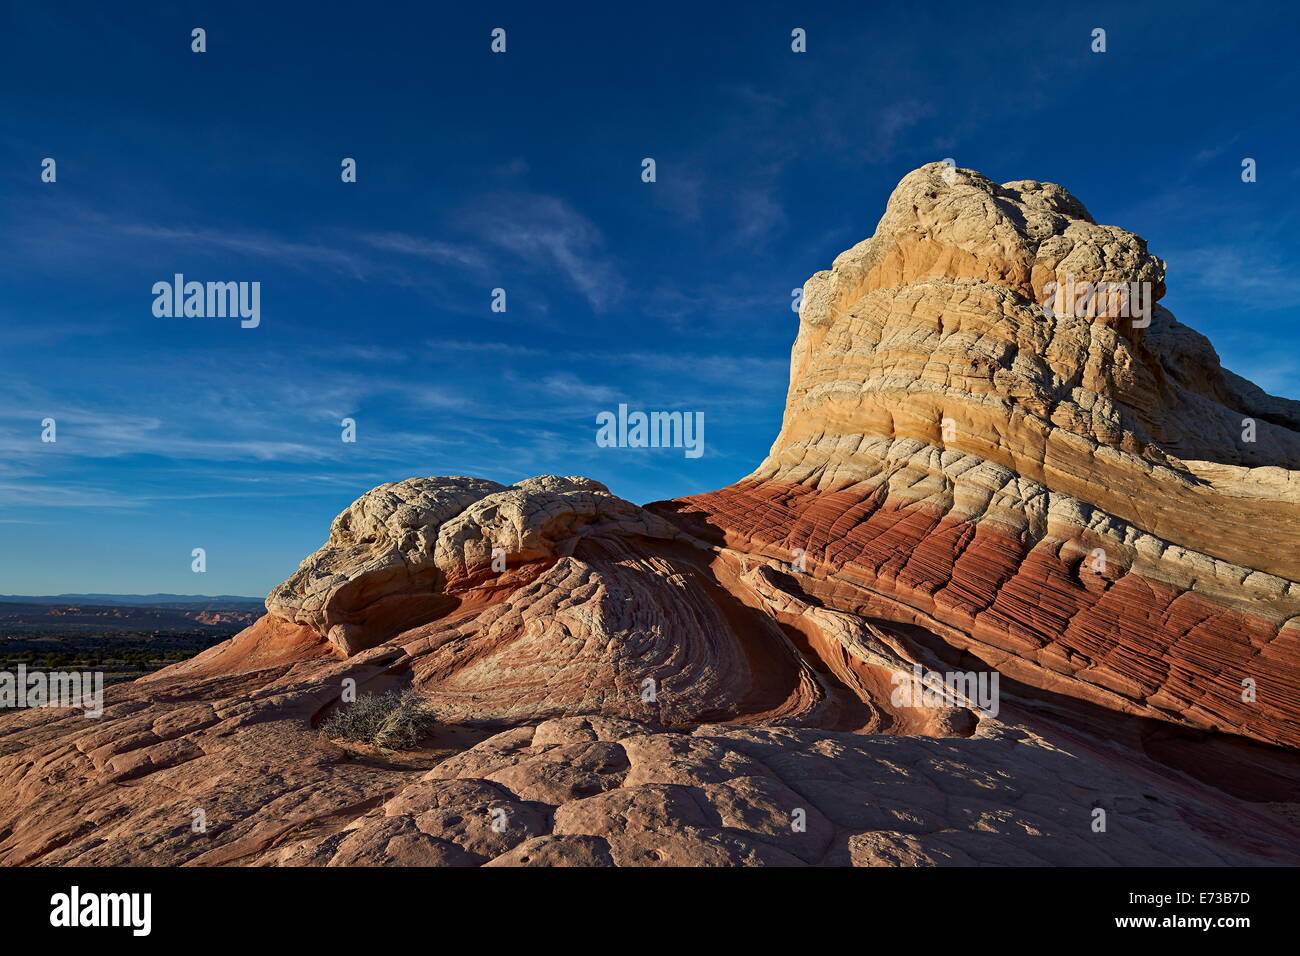 White, tan, and red sandstone butte, White Pocket, Vermilion Cliffs National Monument, Arizona, United States of America Stock Photo